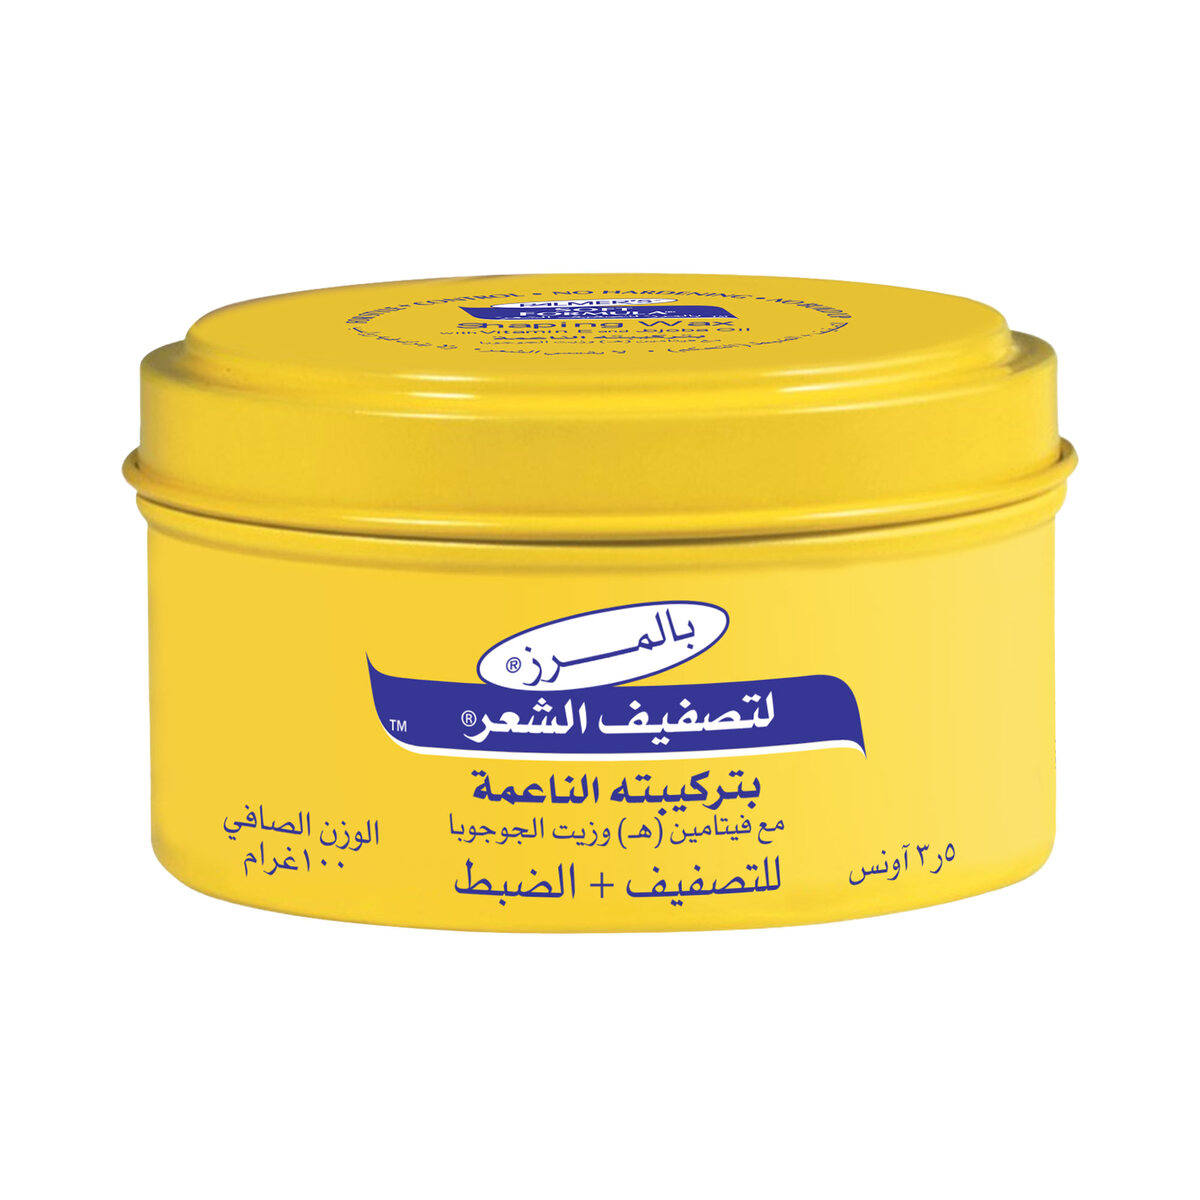 Palmer's Soft Formula Shaping Wax For Style + Control 100 g